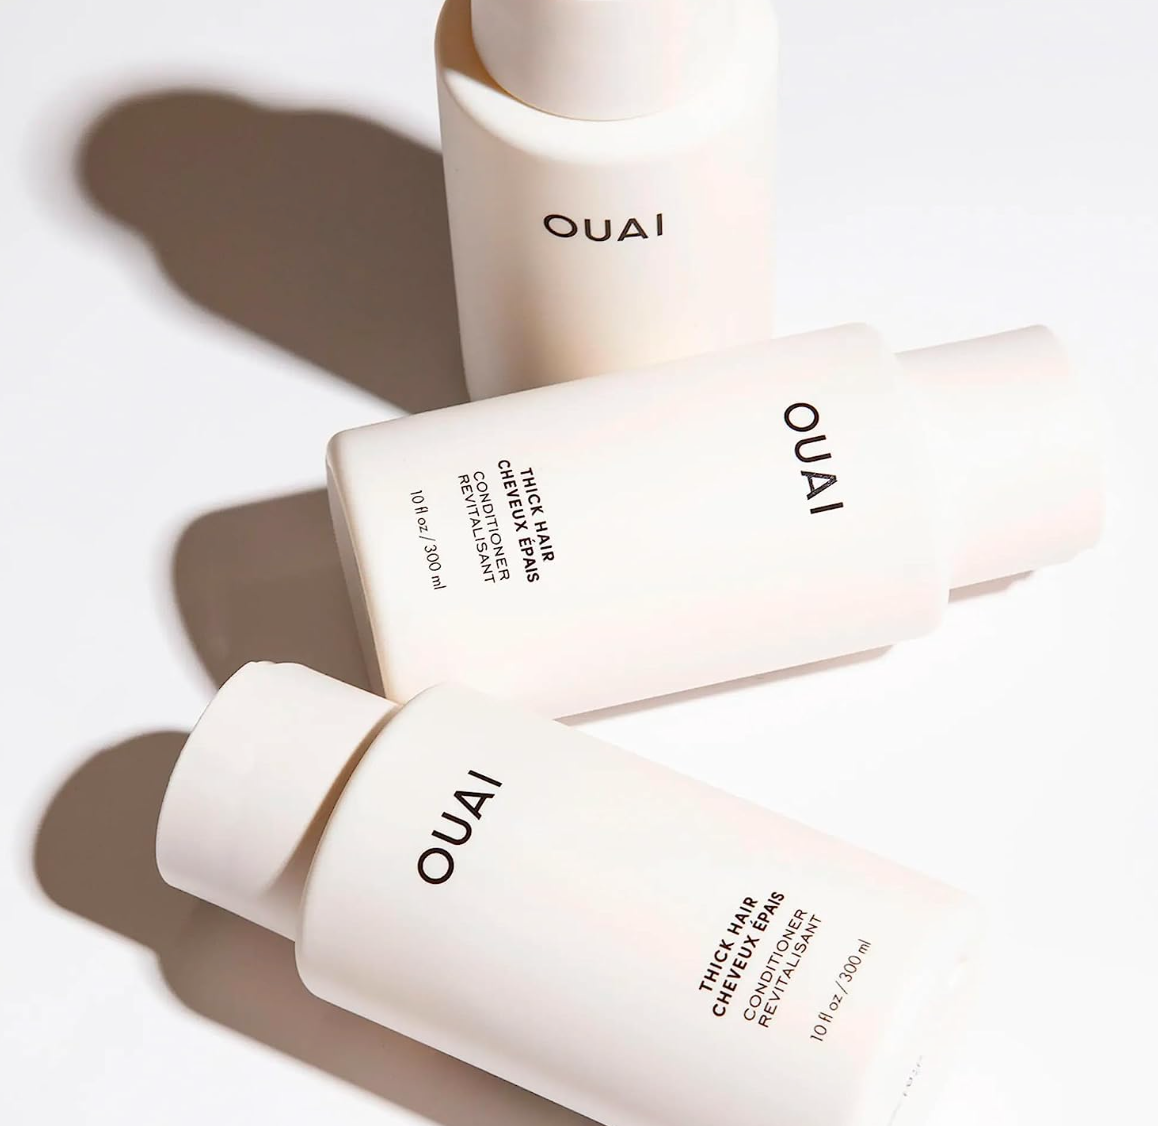 OUAI Thick Conditioner. Strengthening Keratin, Marshmallow Root, Shea Butter and Avocado Oil Nourish Dry, Thick Hair and Calm Frizz. Free from Parabens, Sulfates and Phthalates (10 oz)